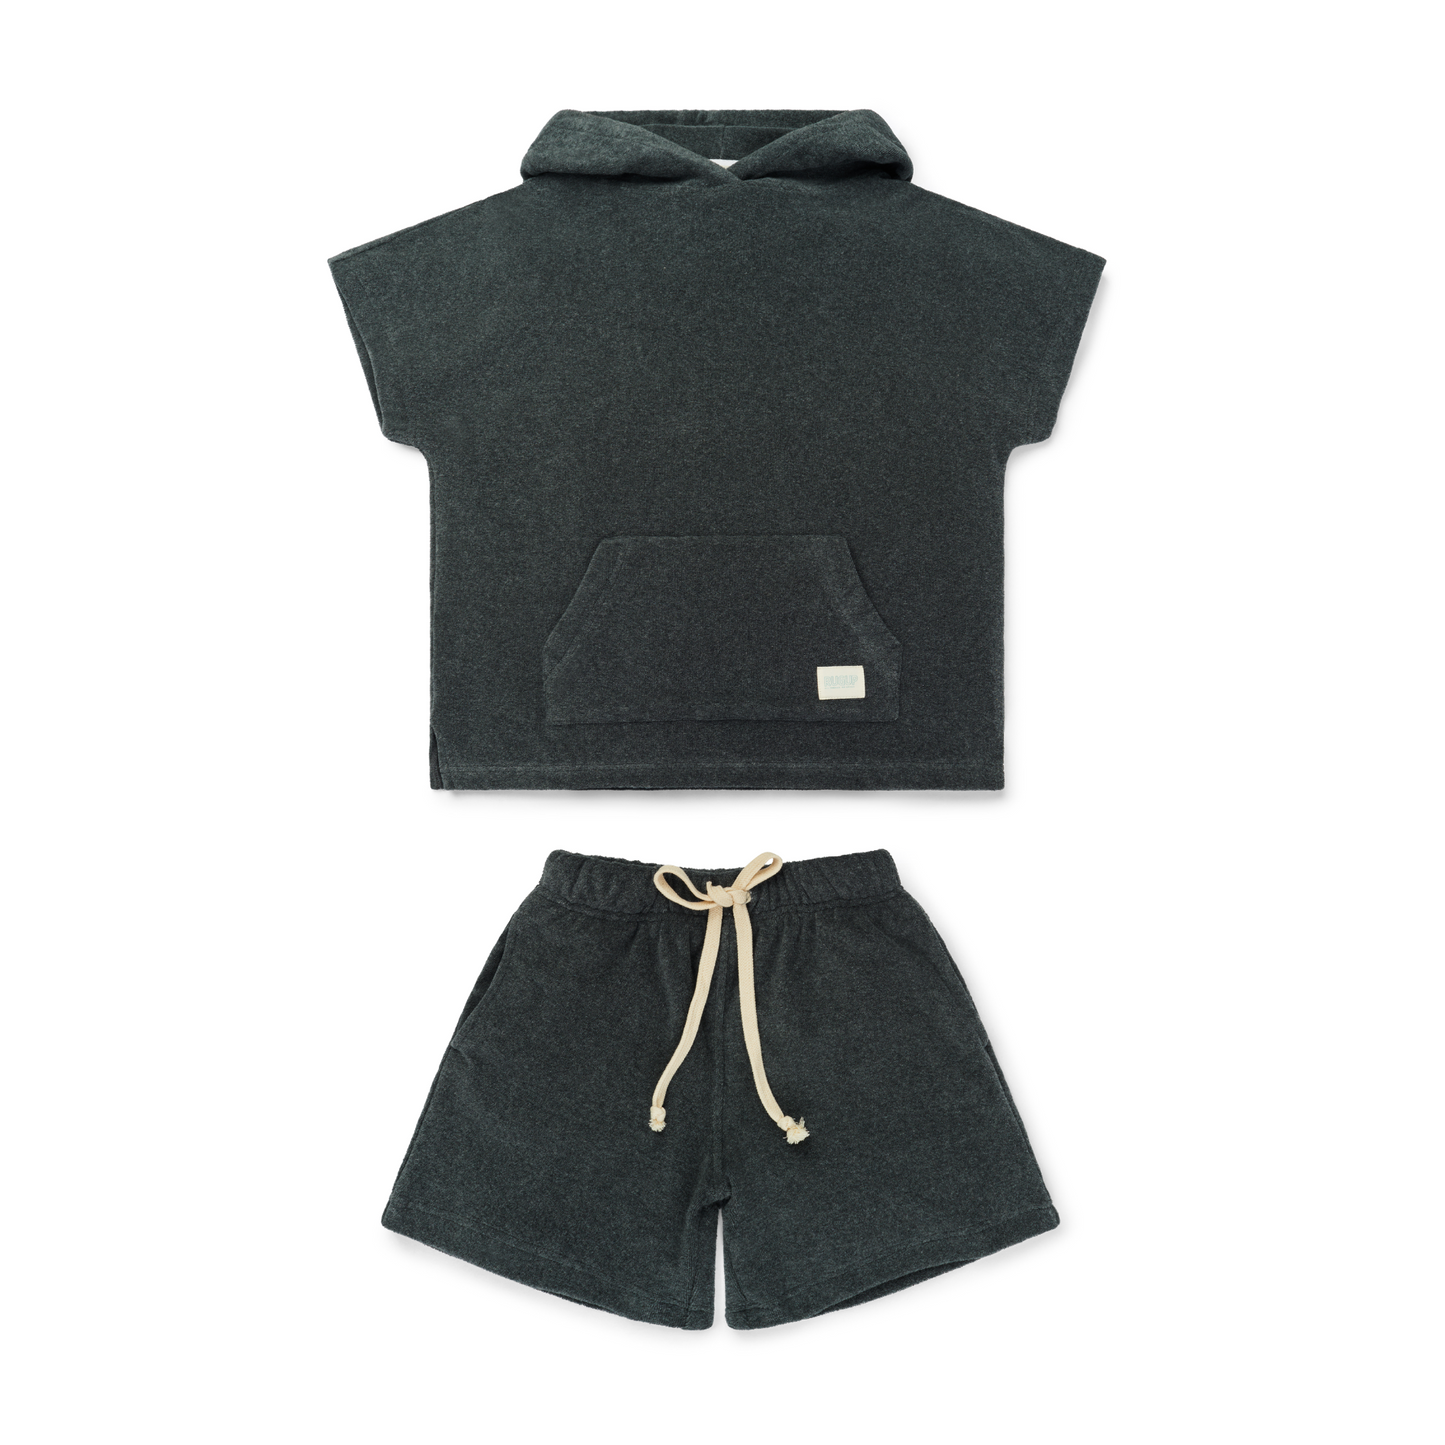 Charcoal Grey Rugii Hooded Towel Top and shorts